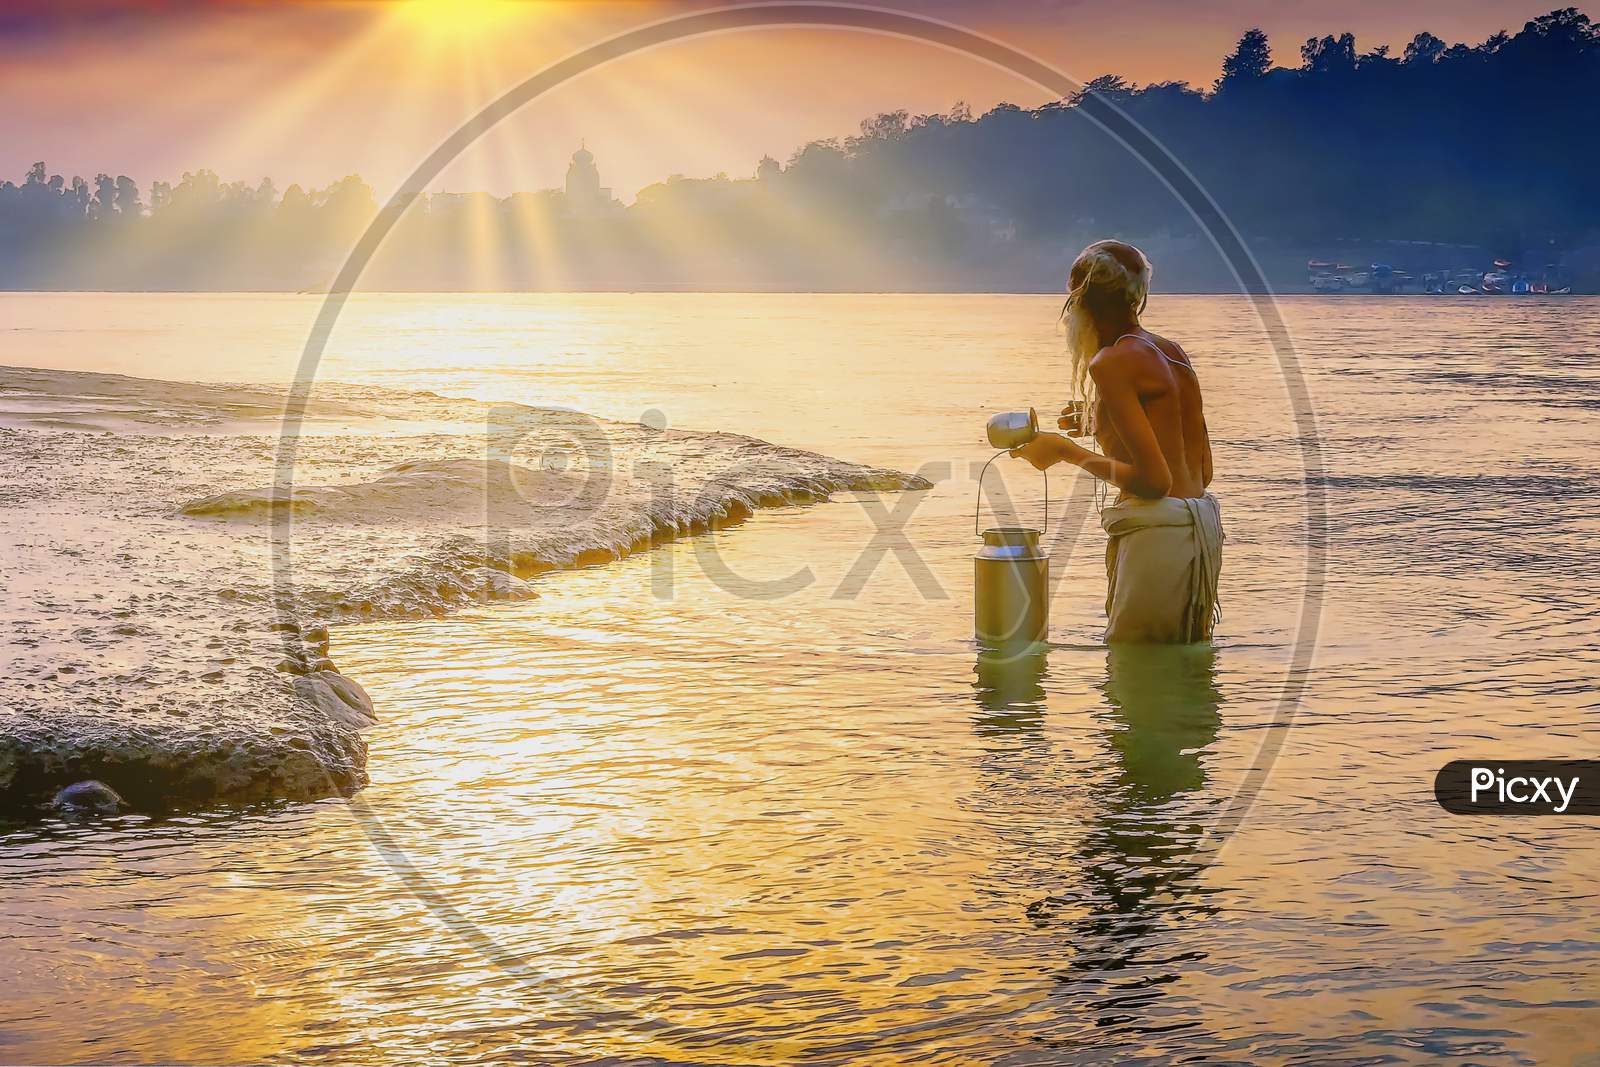 A pilgrim bathing in the holy waters of the Ganges at Rishikesh a city in India’s northern state of Uttarakhand, in the Himalayan foothills beside the Ganges River.